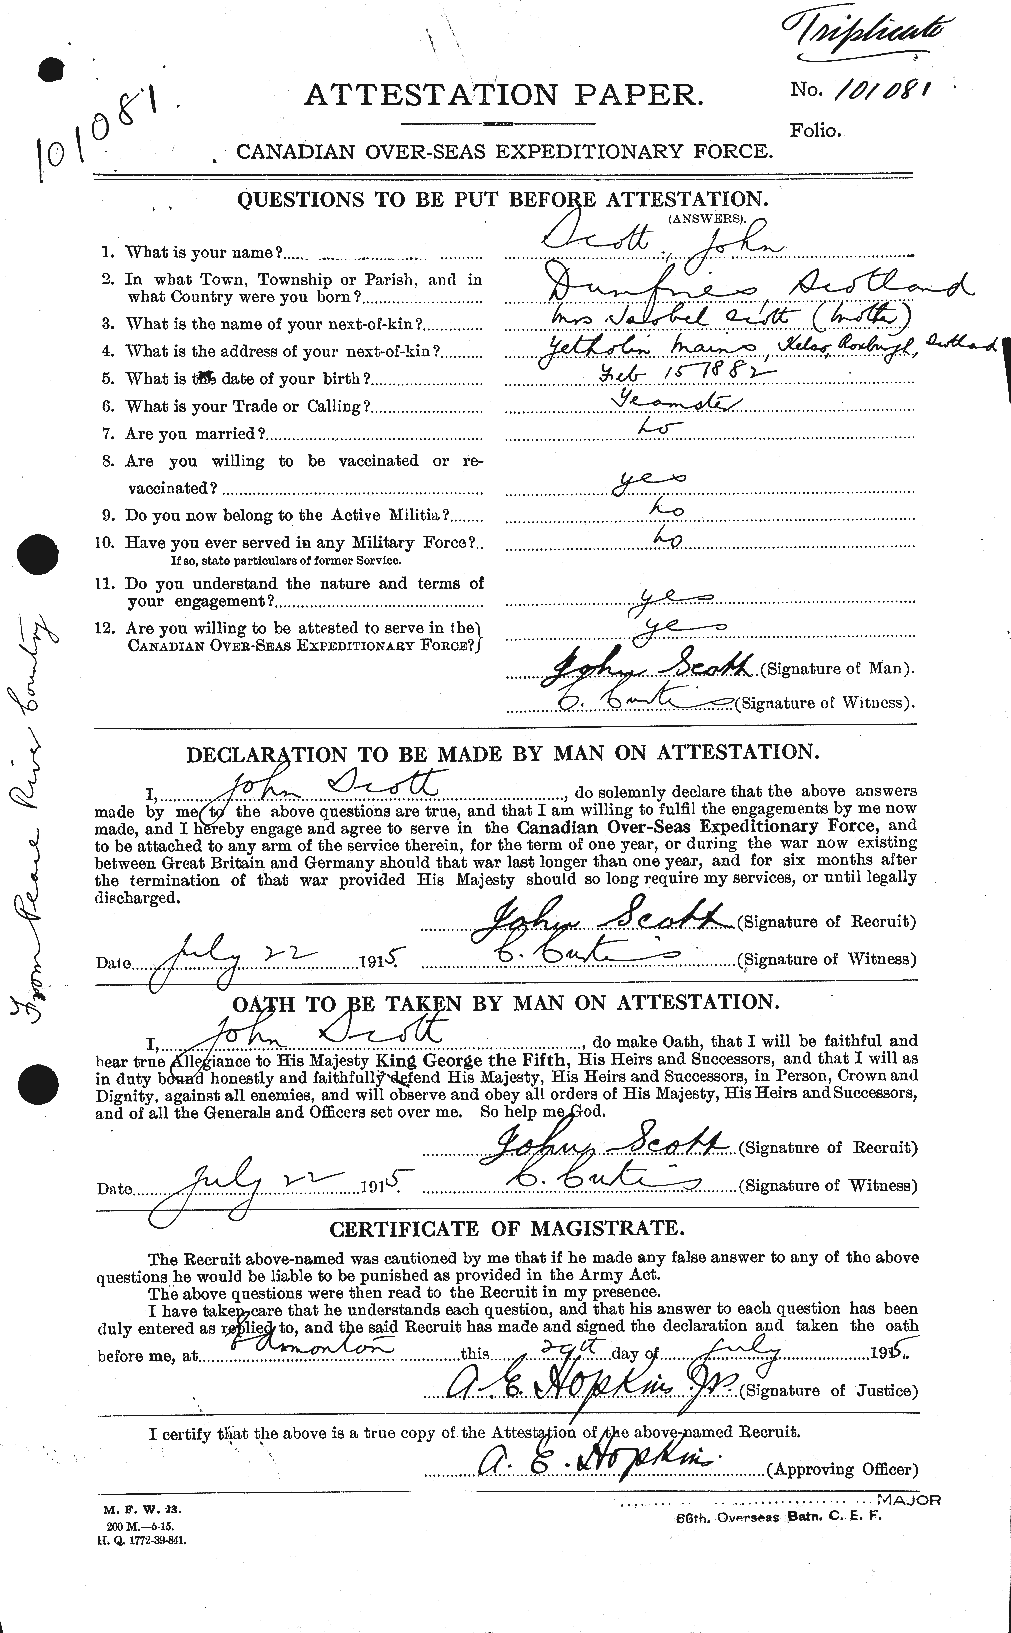 Personnel Records of the First World War - CEF 084898a